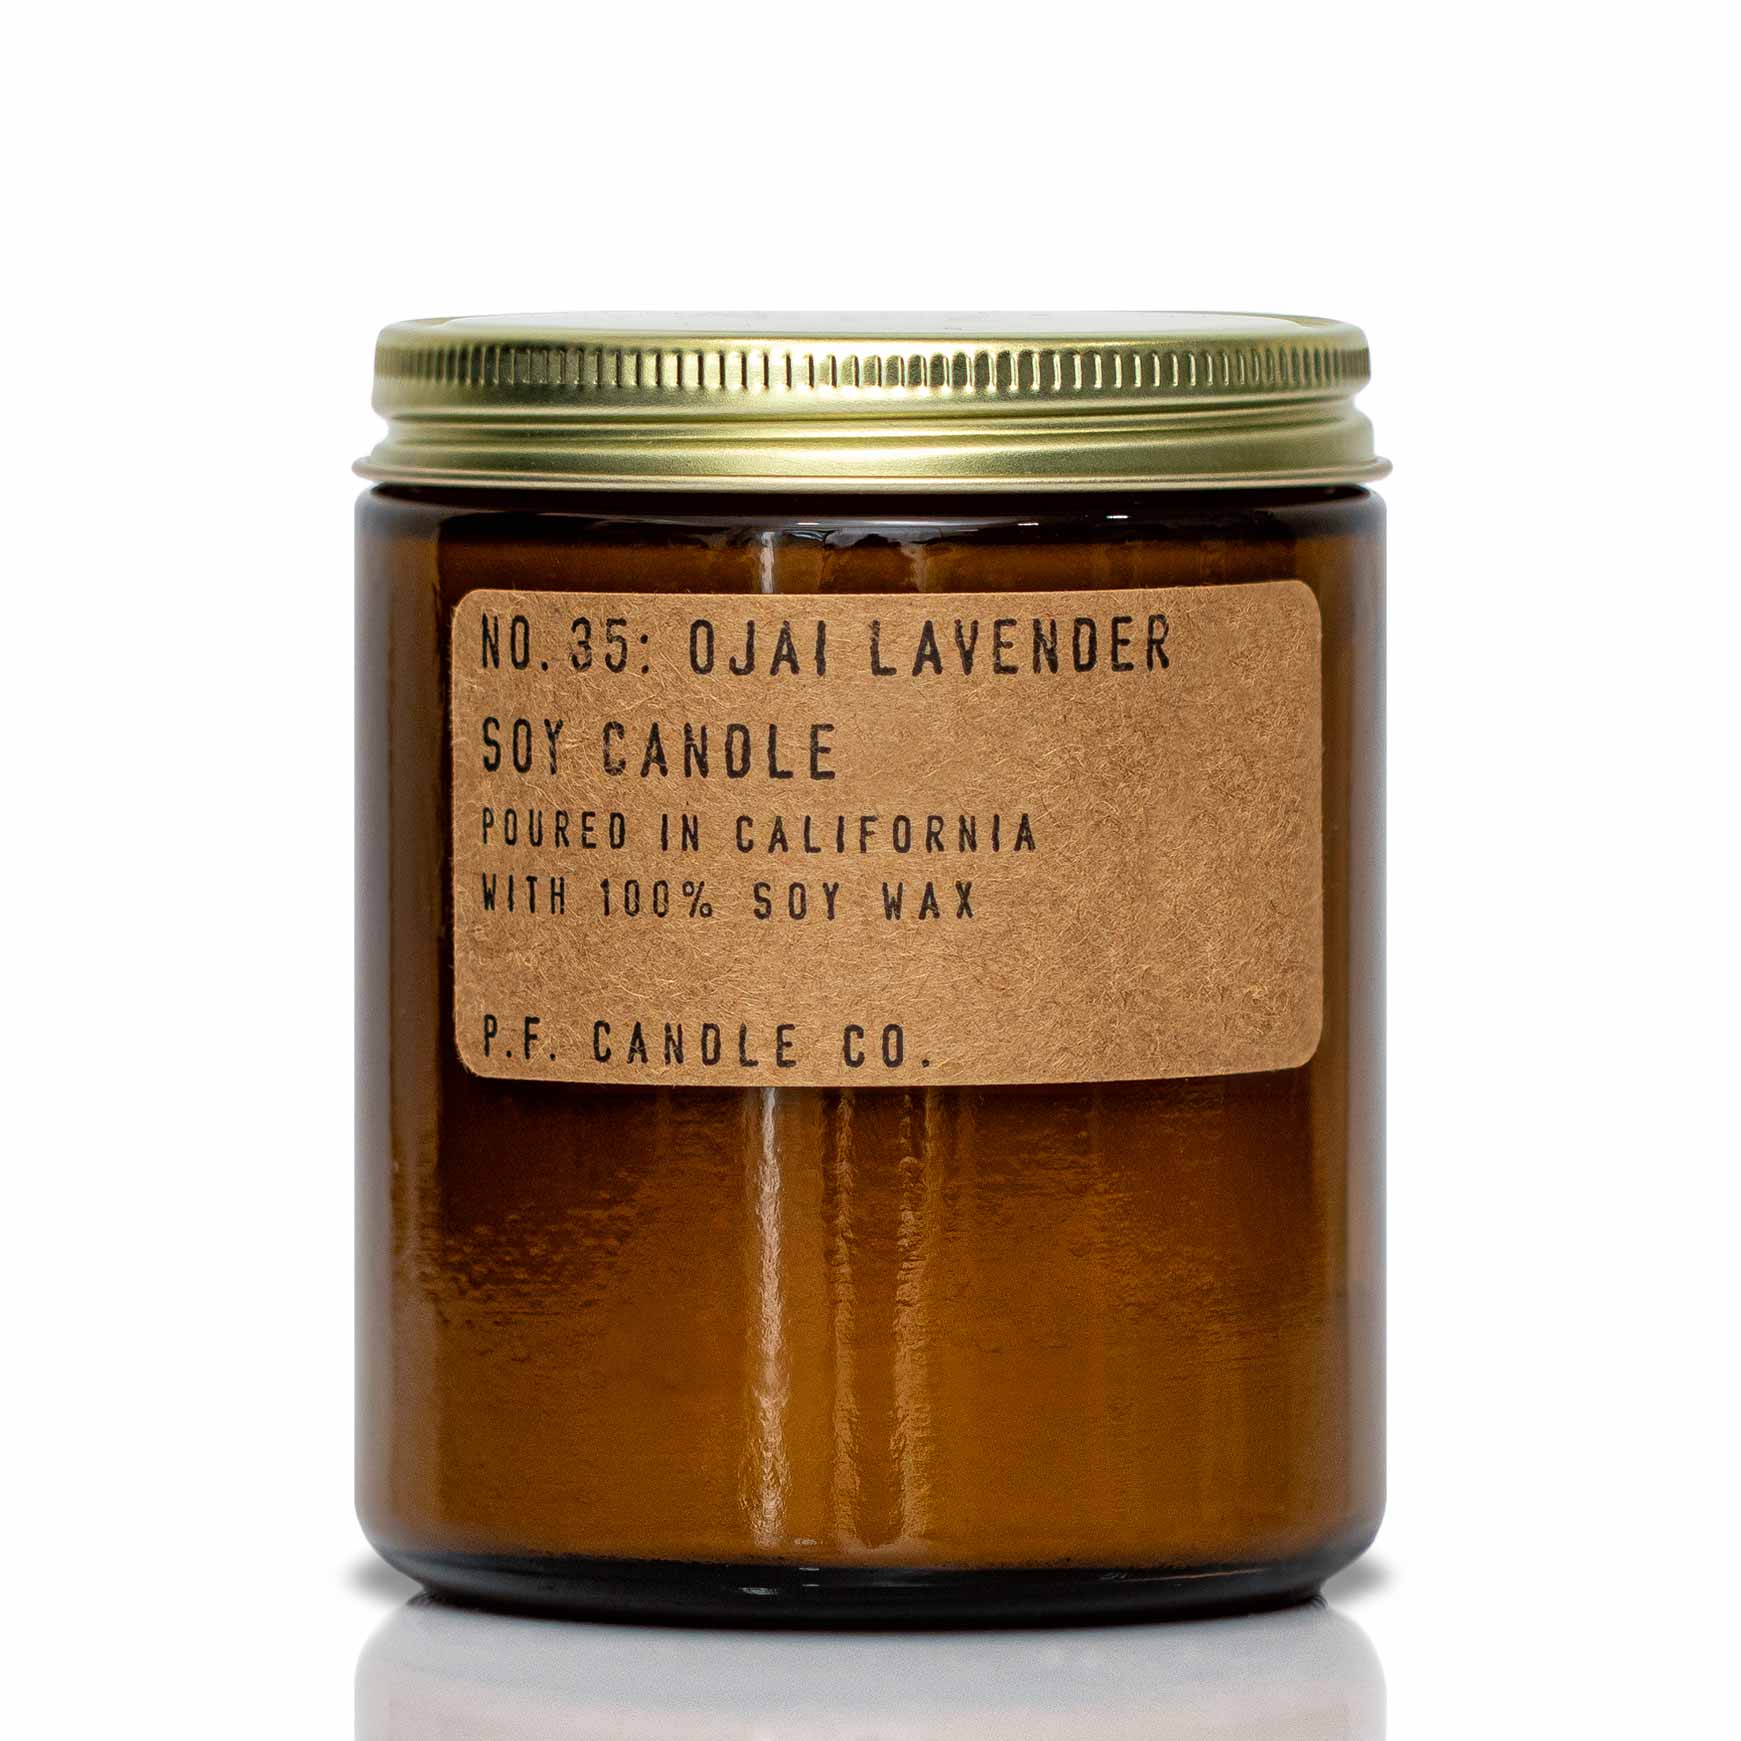 P. F. Candle Co. - Ojai Lavender Soy Candle I The Kings of Styling